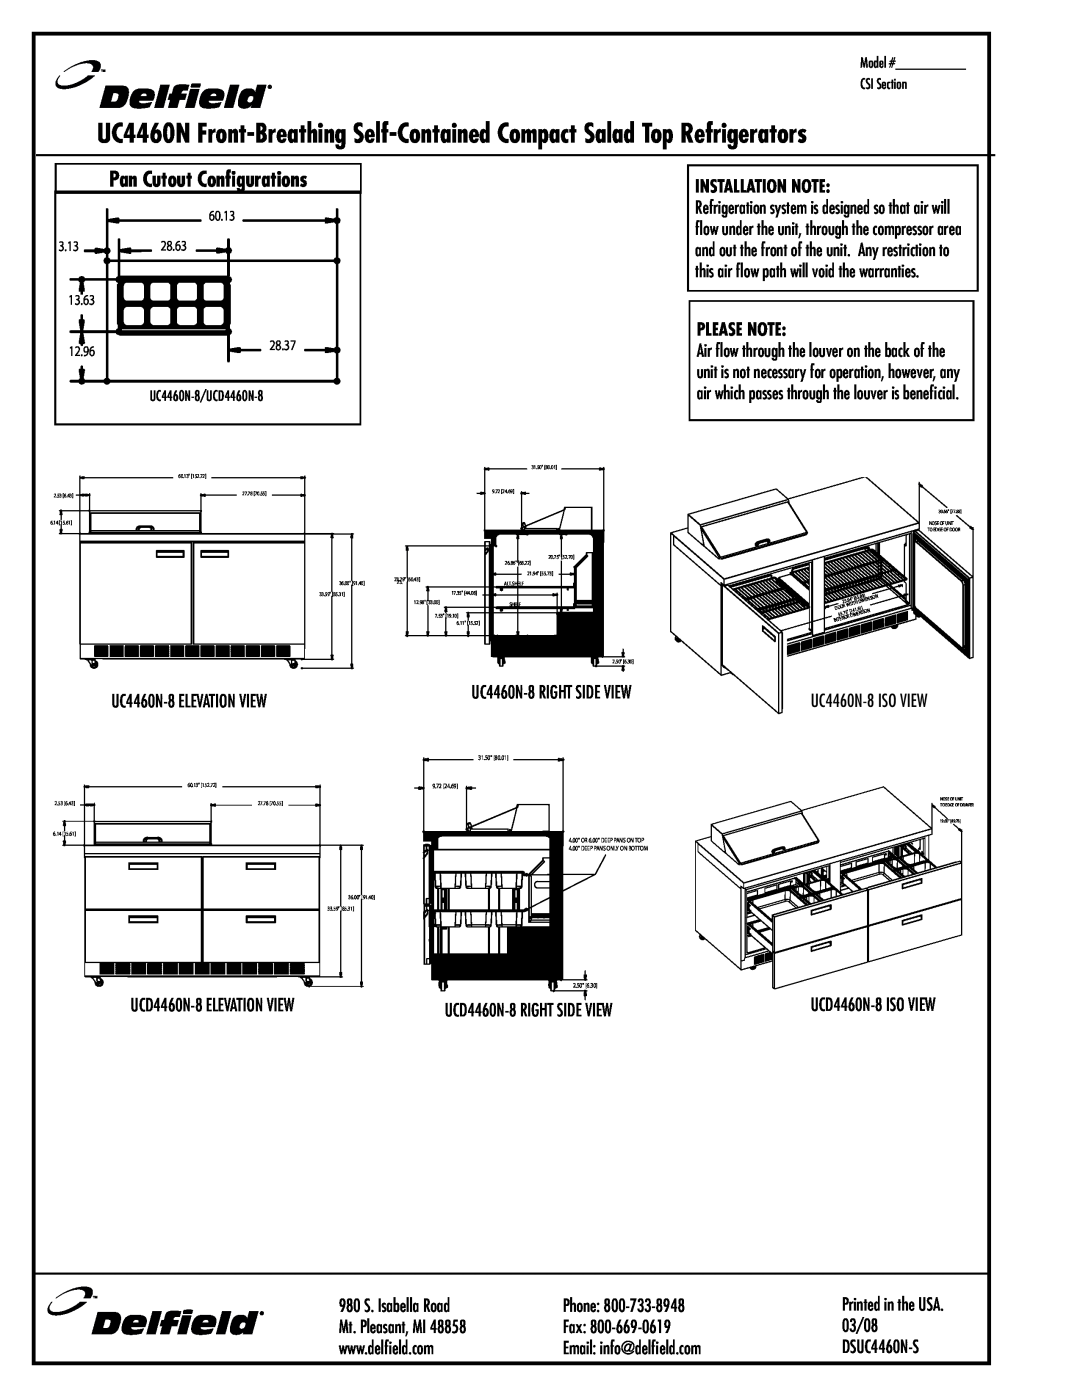 Delfield UC4460N-12 Pan Cutout Configurations, UC4460N-8 ELEVATION VIEW, Installation Note, Please Note, 03/08, Phone 